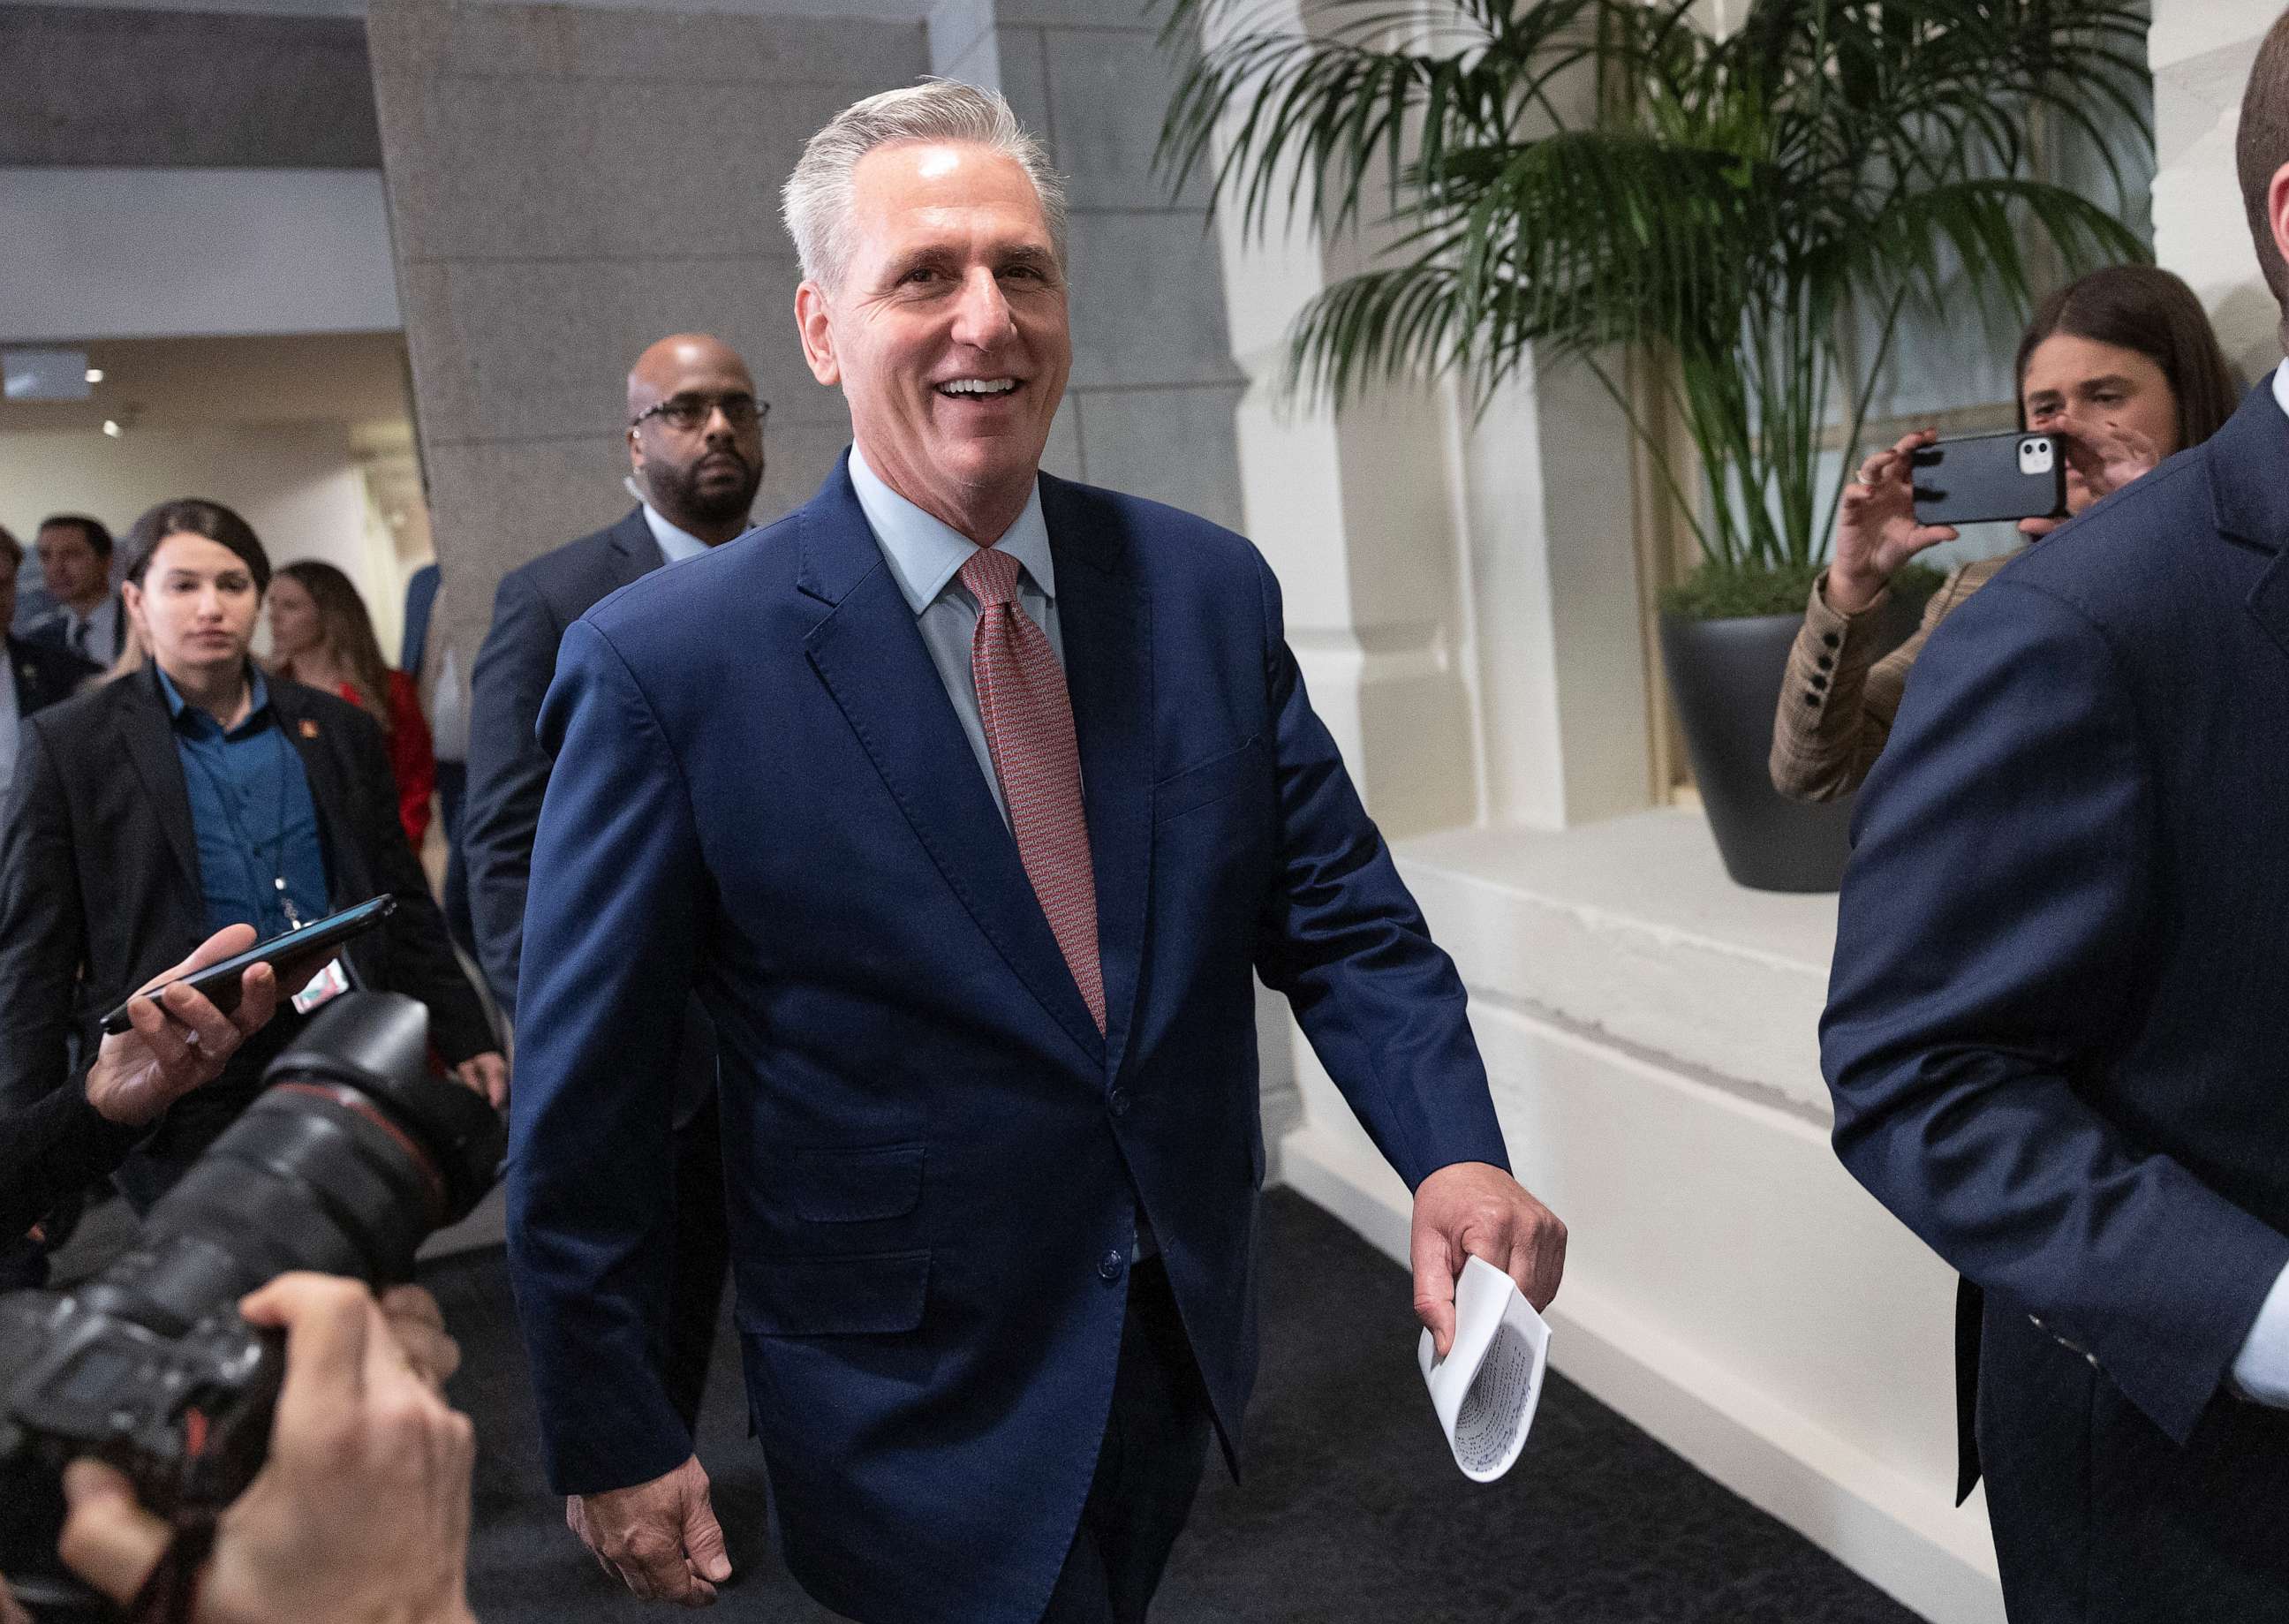 PHOTO: House Minority Leader Kevin McCarthy walks to a meeting with House Republicans at the U.S. Capitol Building on Jan. 3, 2023 in Washington, D.C.